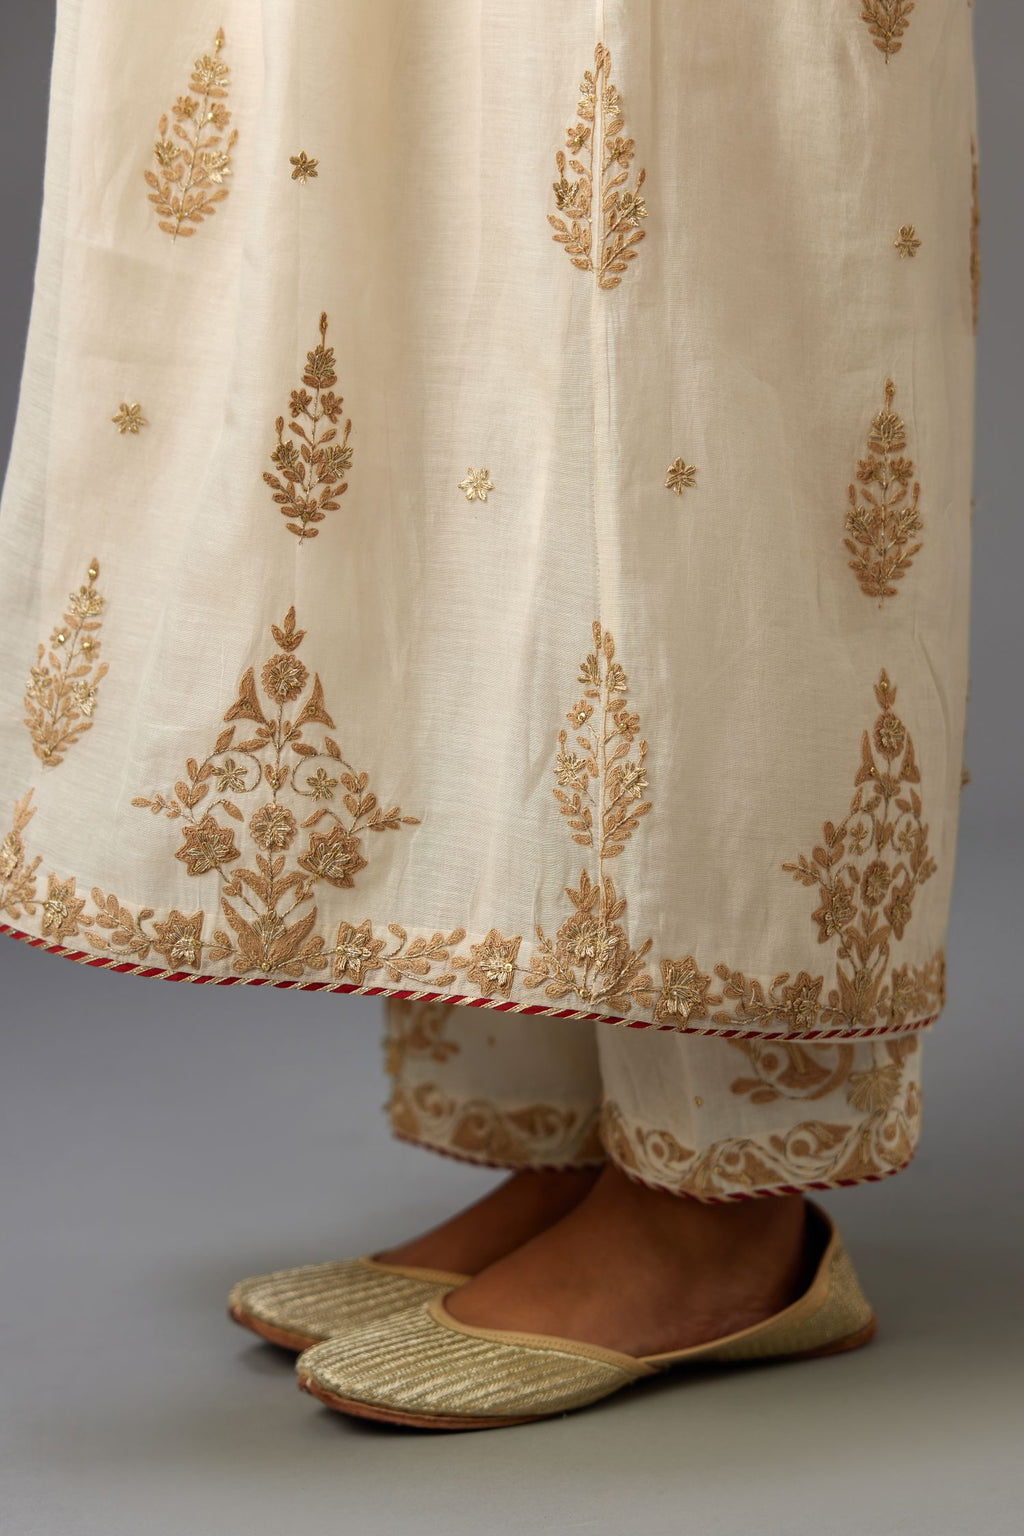 Off white cotton chanderi kurta-dress set with dori and gota embroidery, highlighted with gold sequins work.